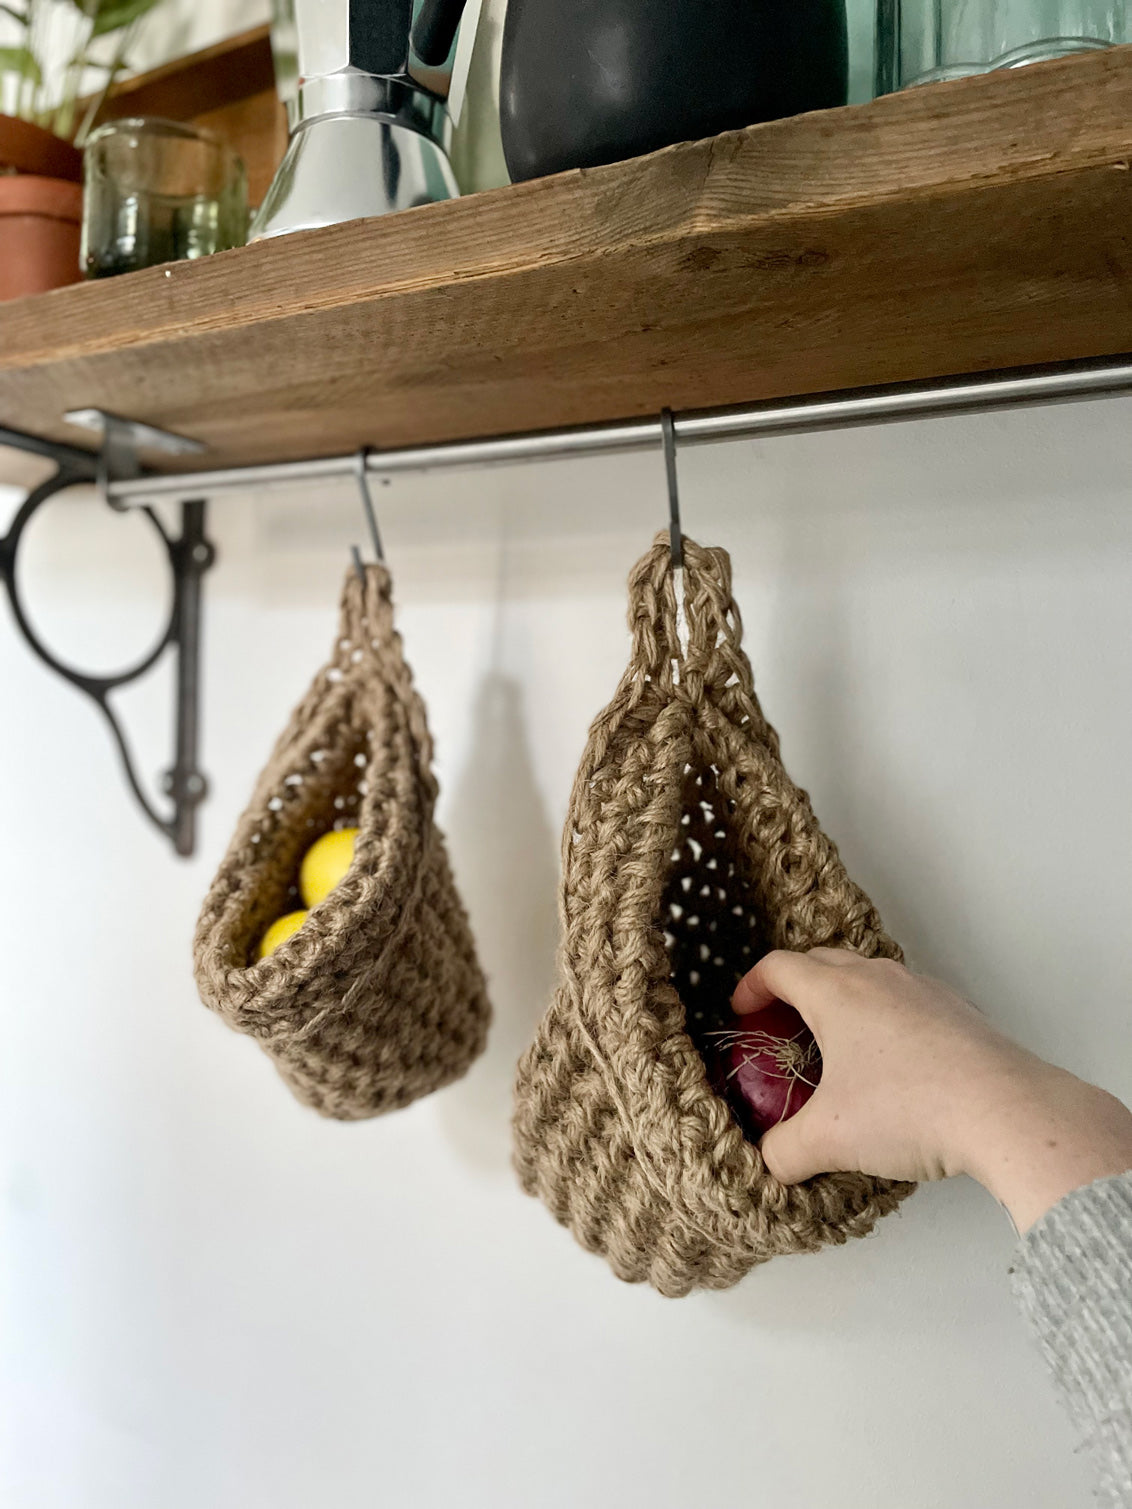 mage showing kitchen shelf with hanging storage bag suspended by a metal hook, handmade storage bag containing red onions in a kitchen, breathable storage bag for kitchen produce displayed on a hanging rail, space saving hanging storage in a kitchen wall, brown jute handmade storage bag